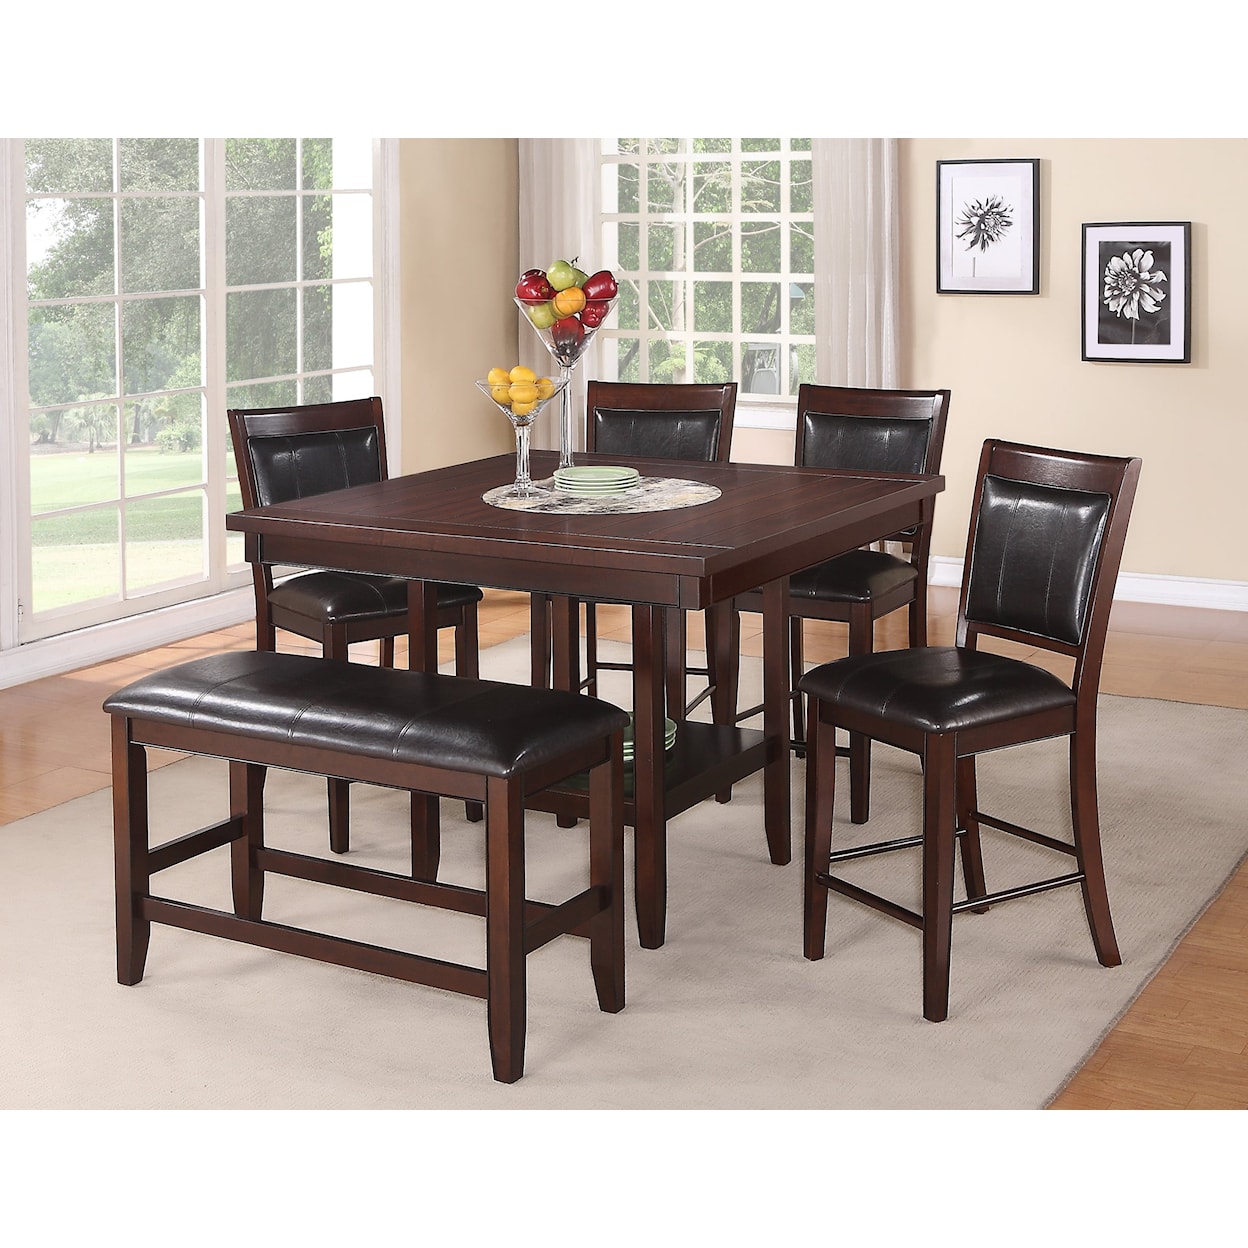 Crown Mark Fulton 6-Pc Counter Height Table, Chair & Bench Set